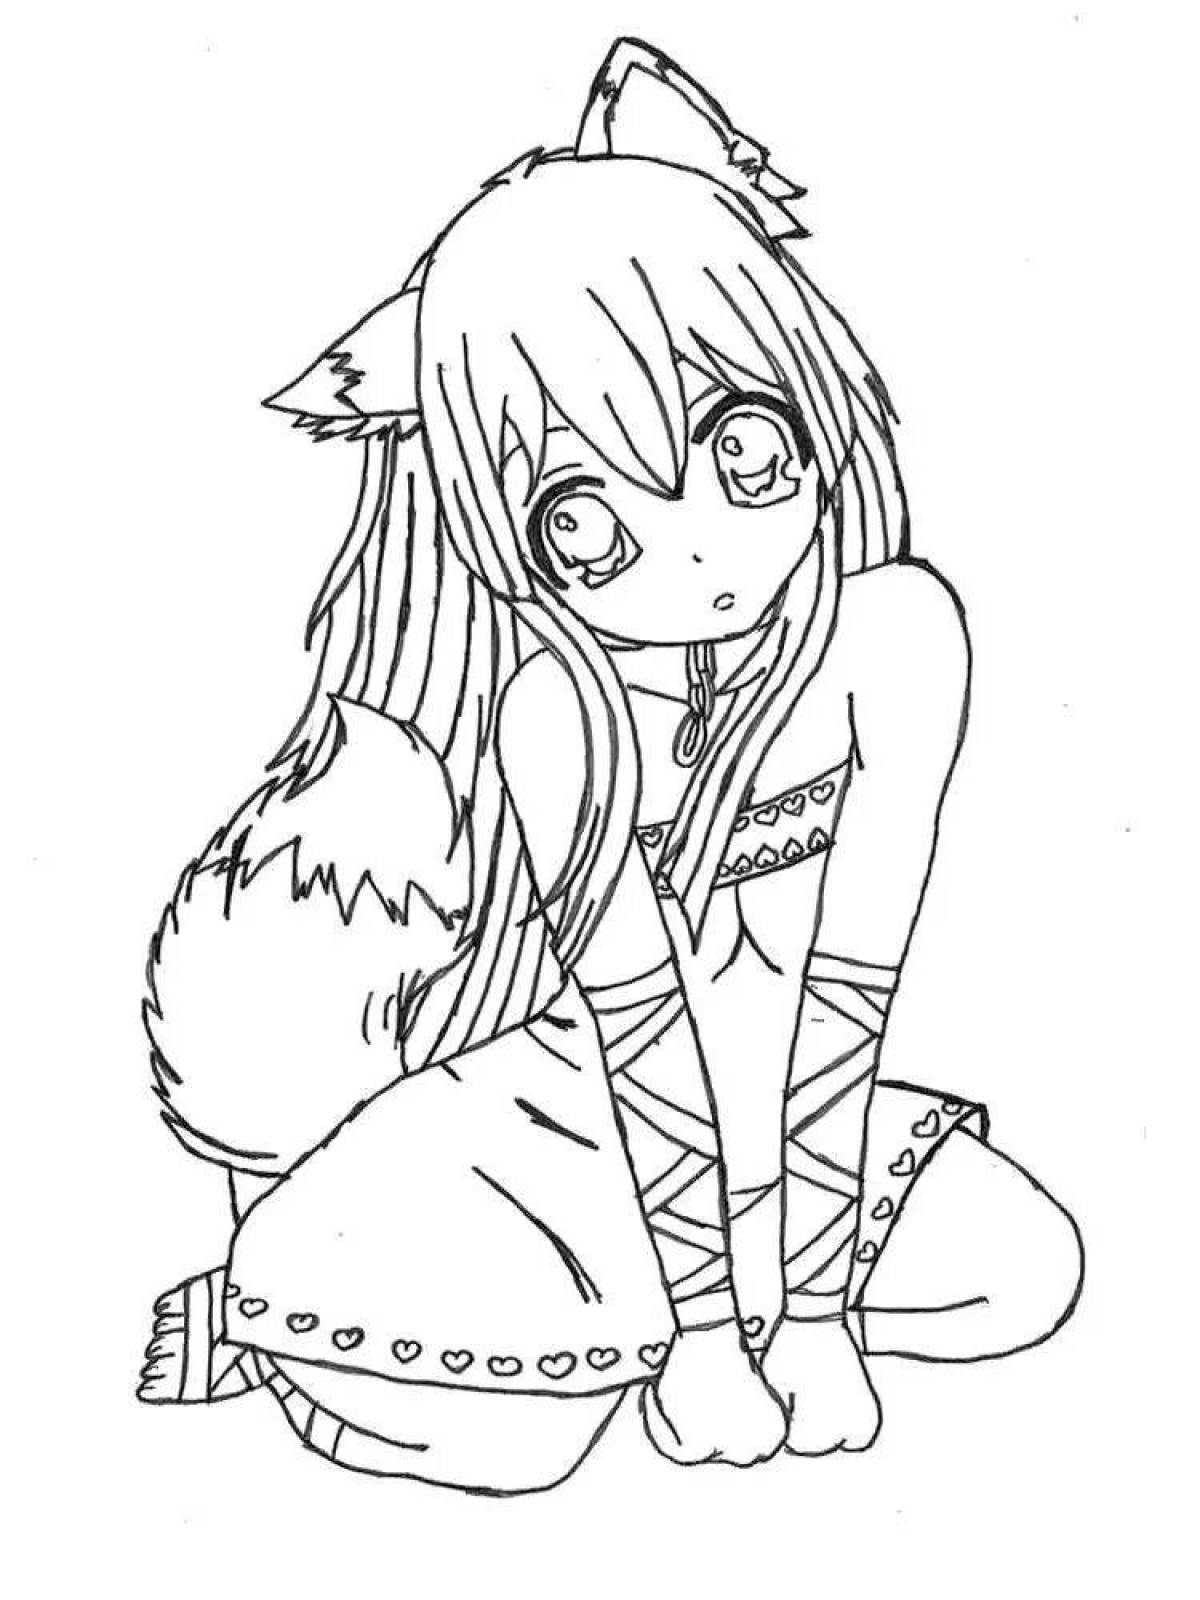 Great anime girls coloring book